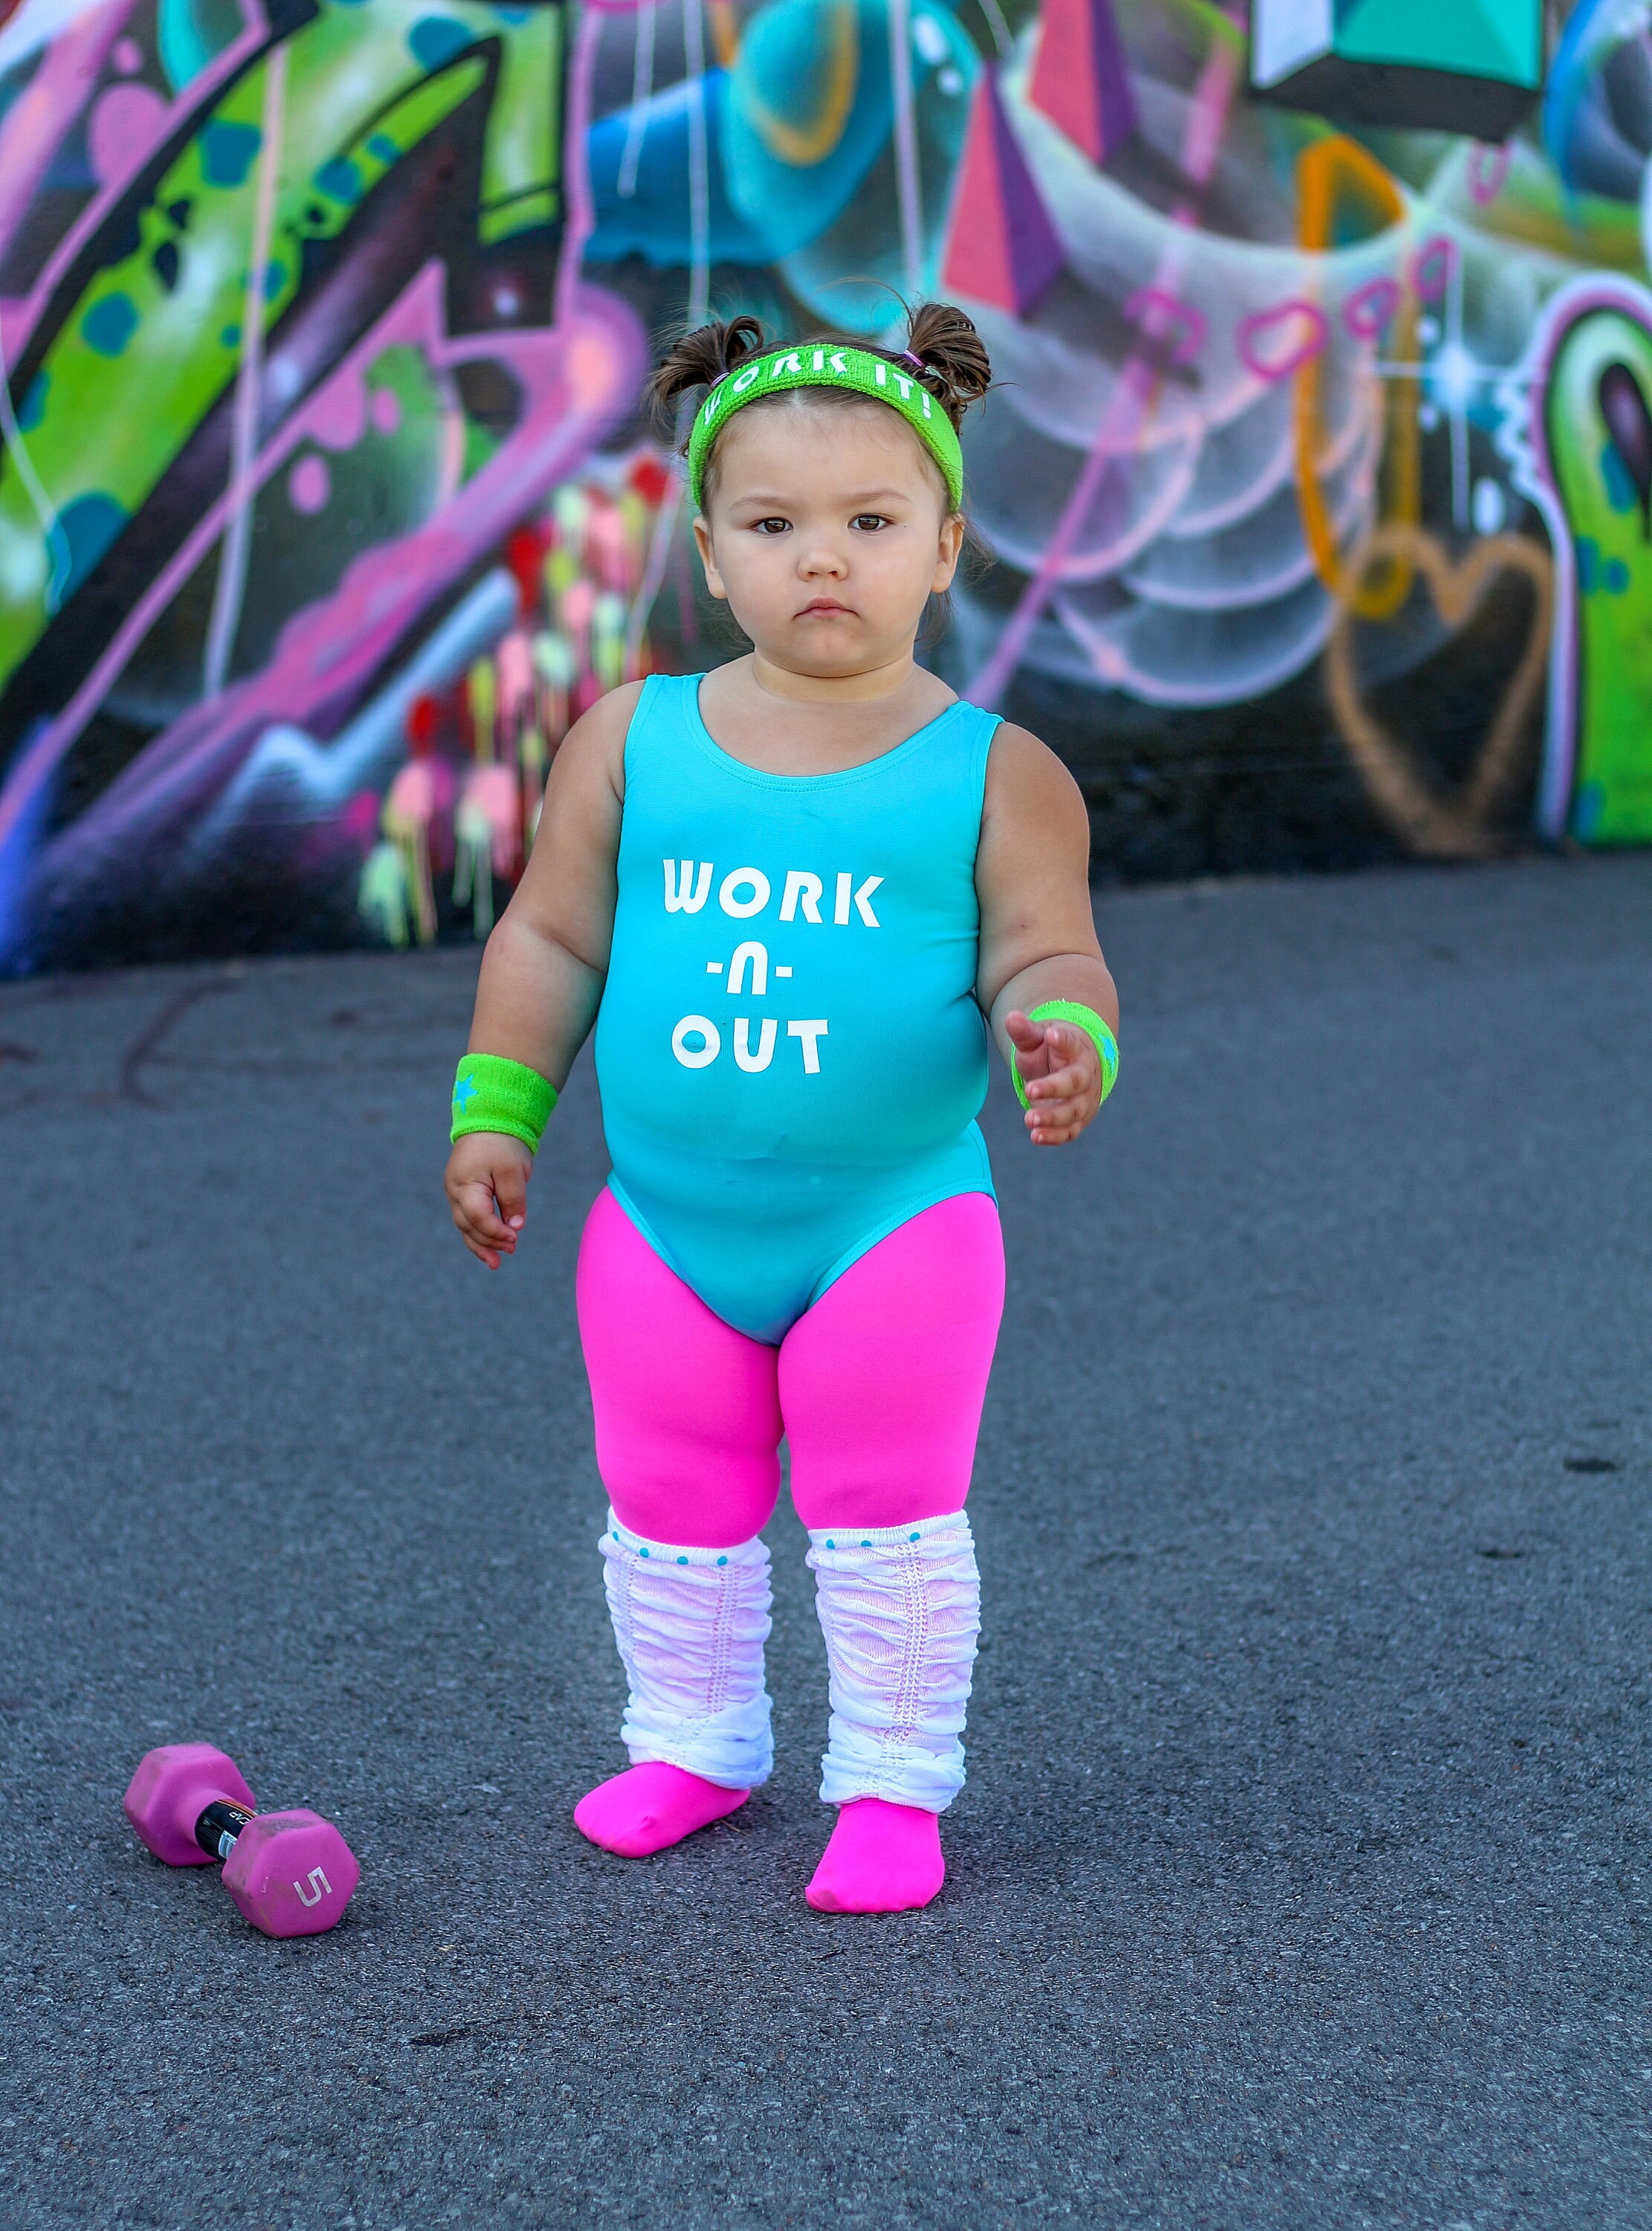 5 Day Baby 80s workout costume for Burn Fat fast